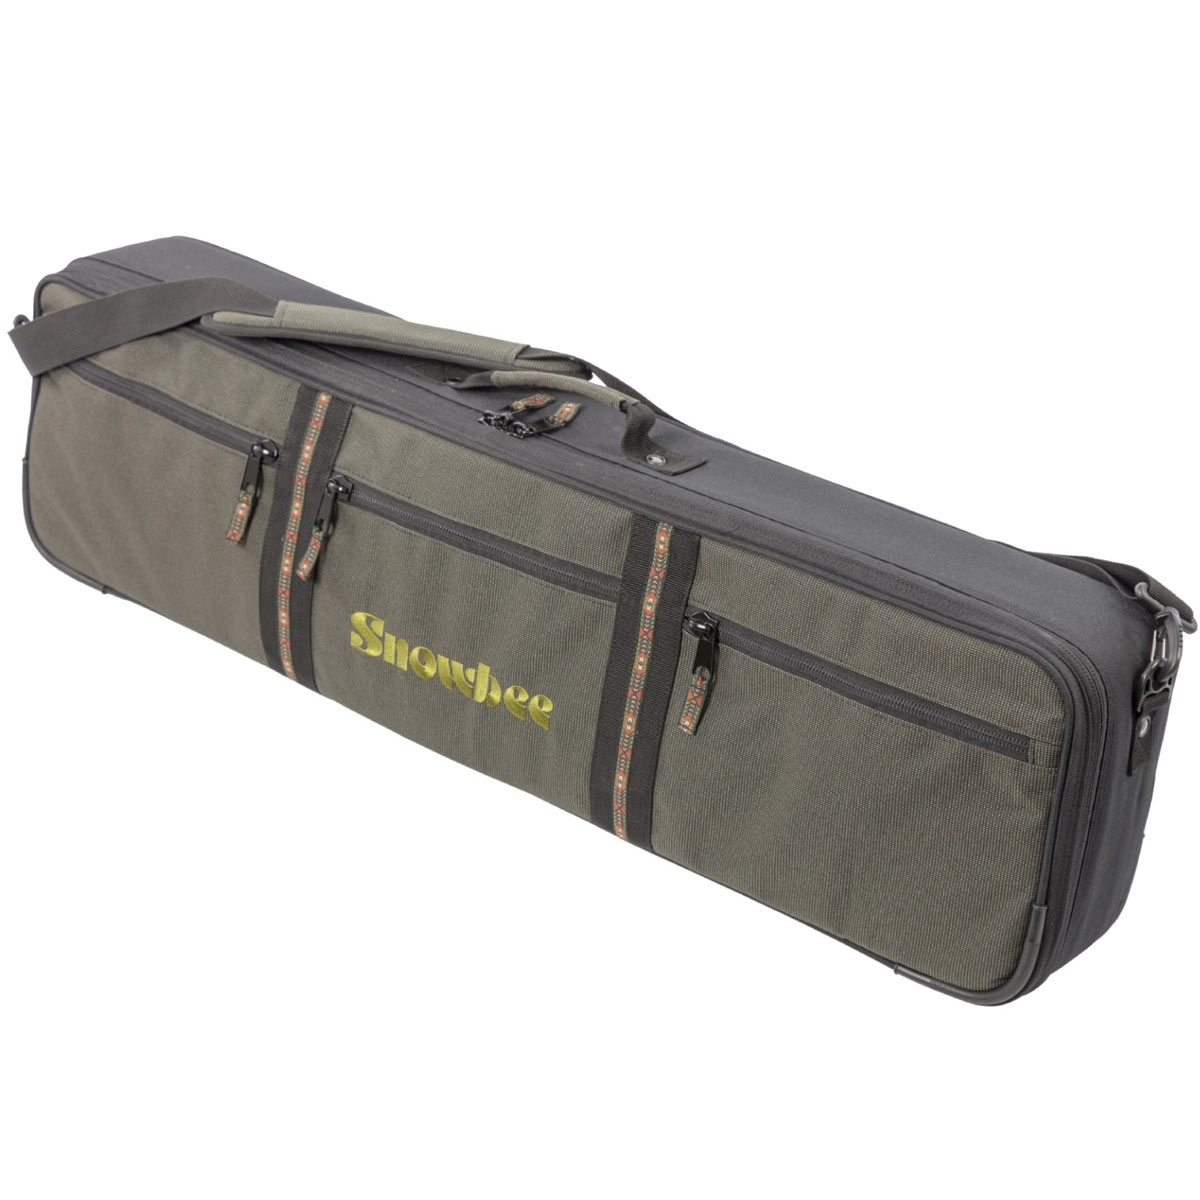 https://cdn.anglingactive.co.uk/media/catalog/product/cache/c7a5695839b539f20c8015776a05748c/s/n/snowbee_xs_stowaway_travel_cases_-_fishing_bags_storage_luggage.jpg